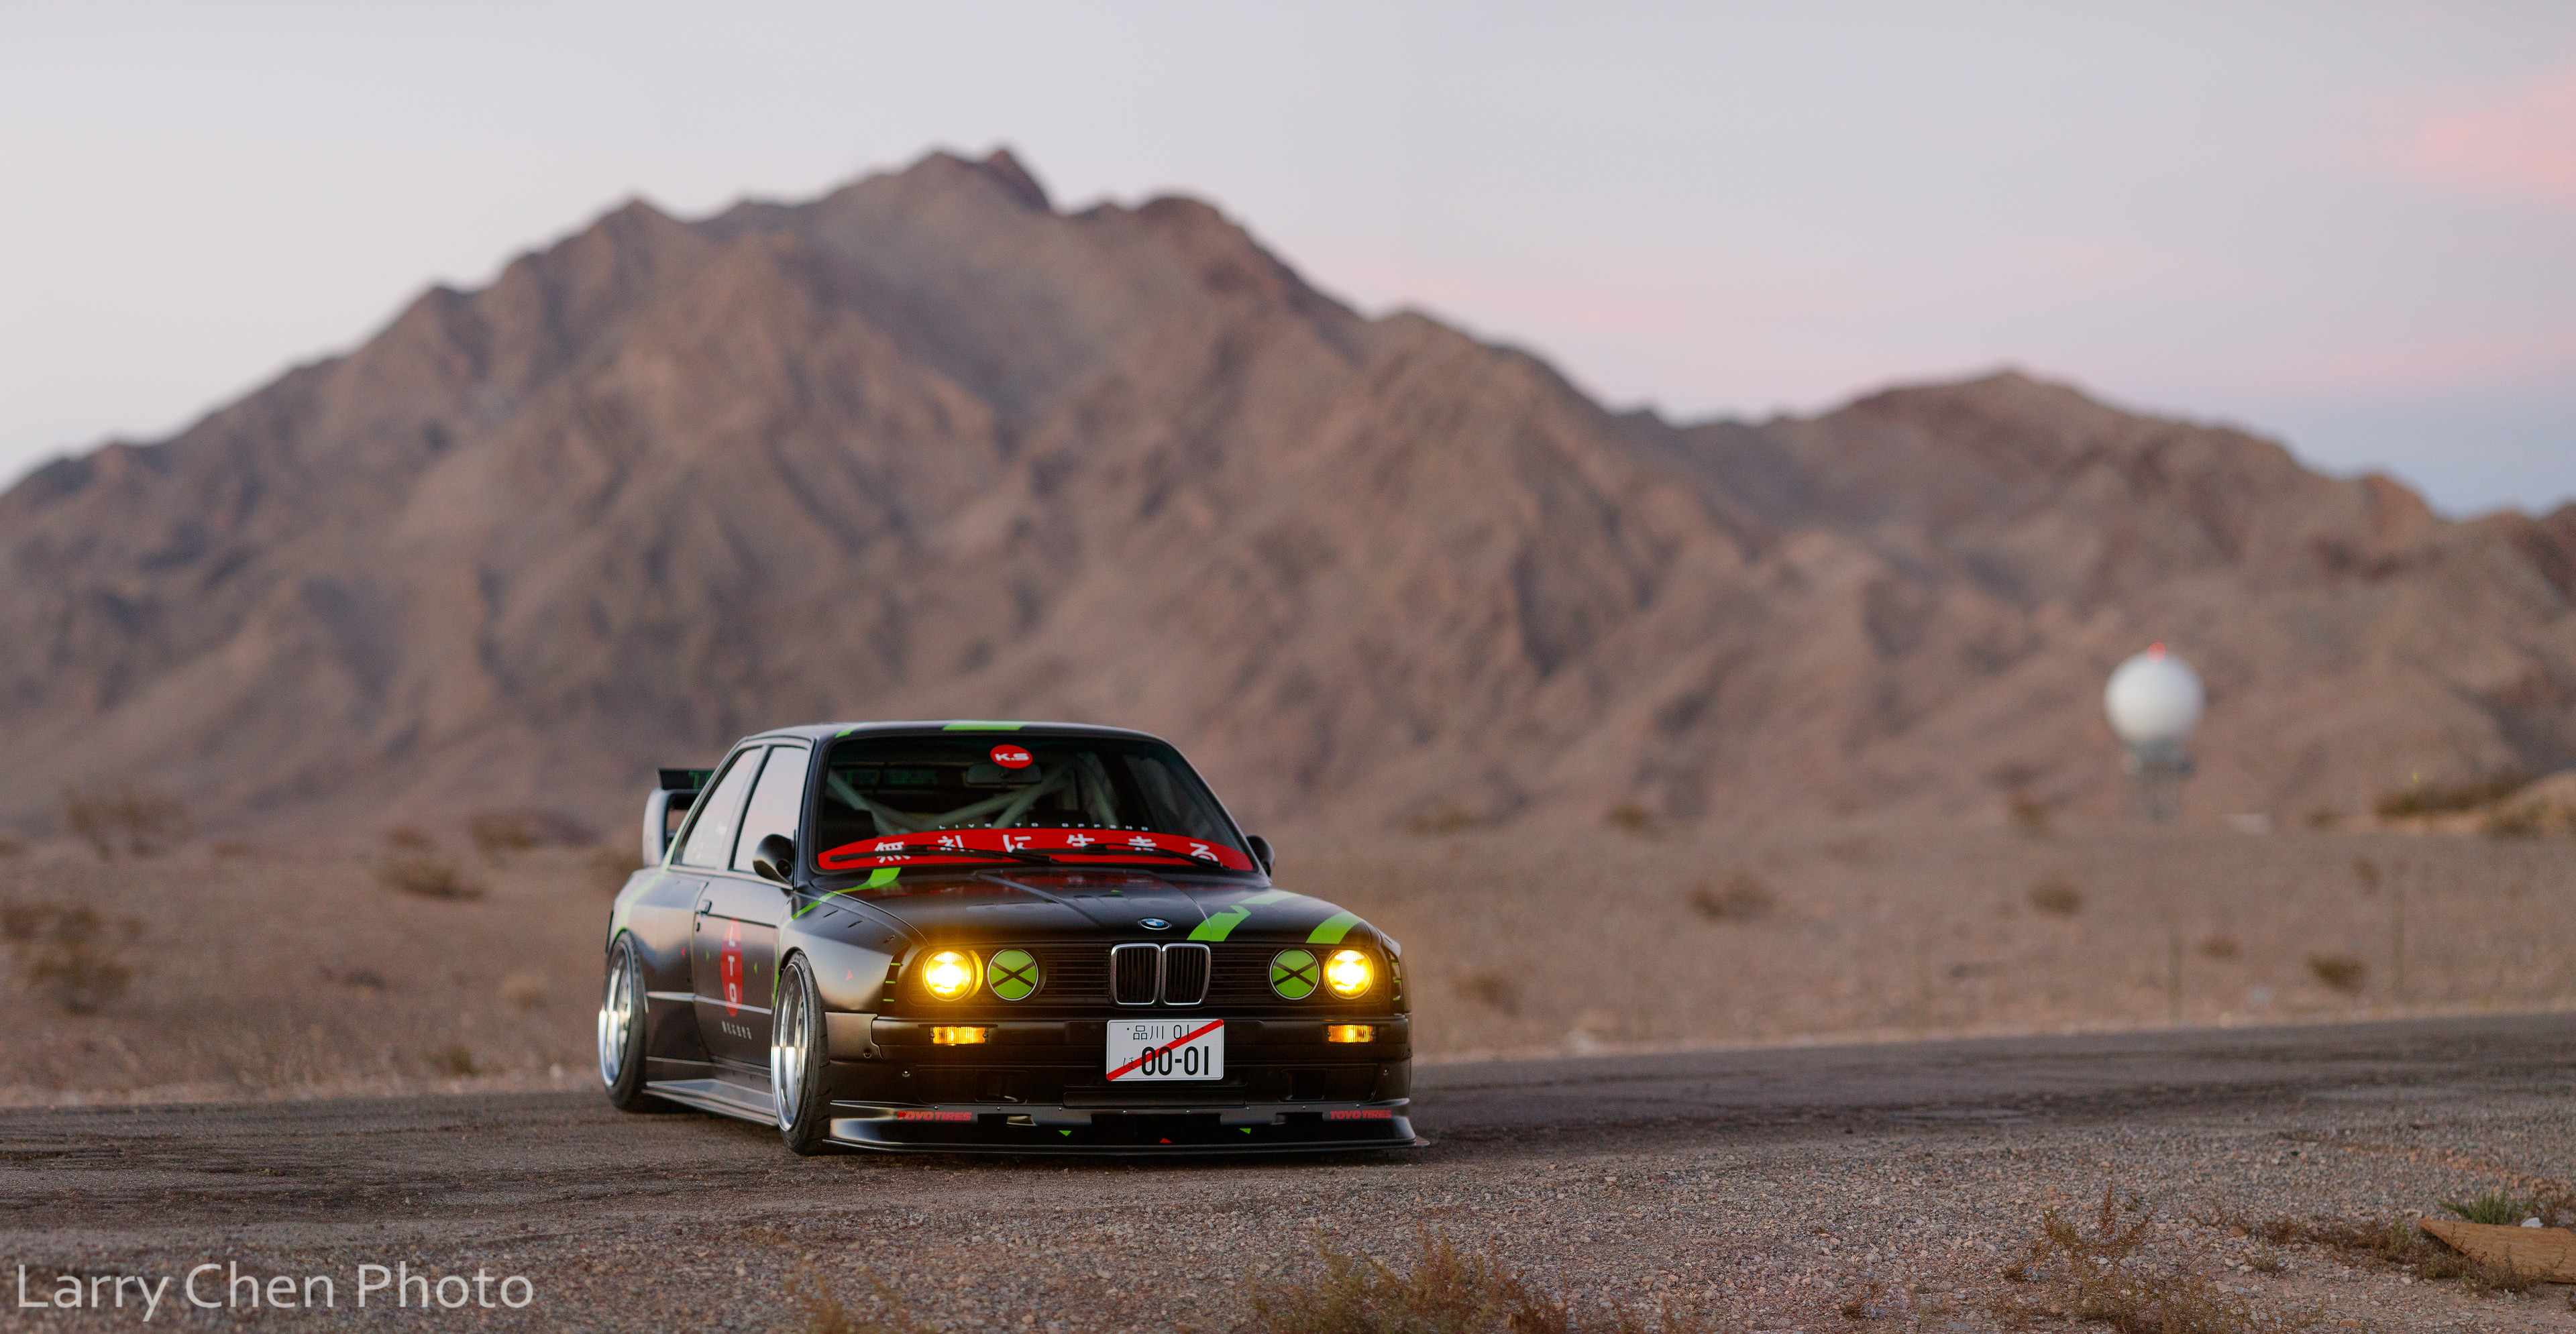 General 3840x1989 BMW German cars black cars race cars desert car mountains Larry Chen Live To Offend